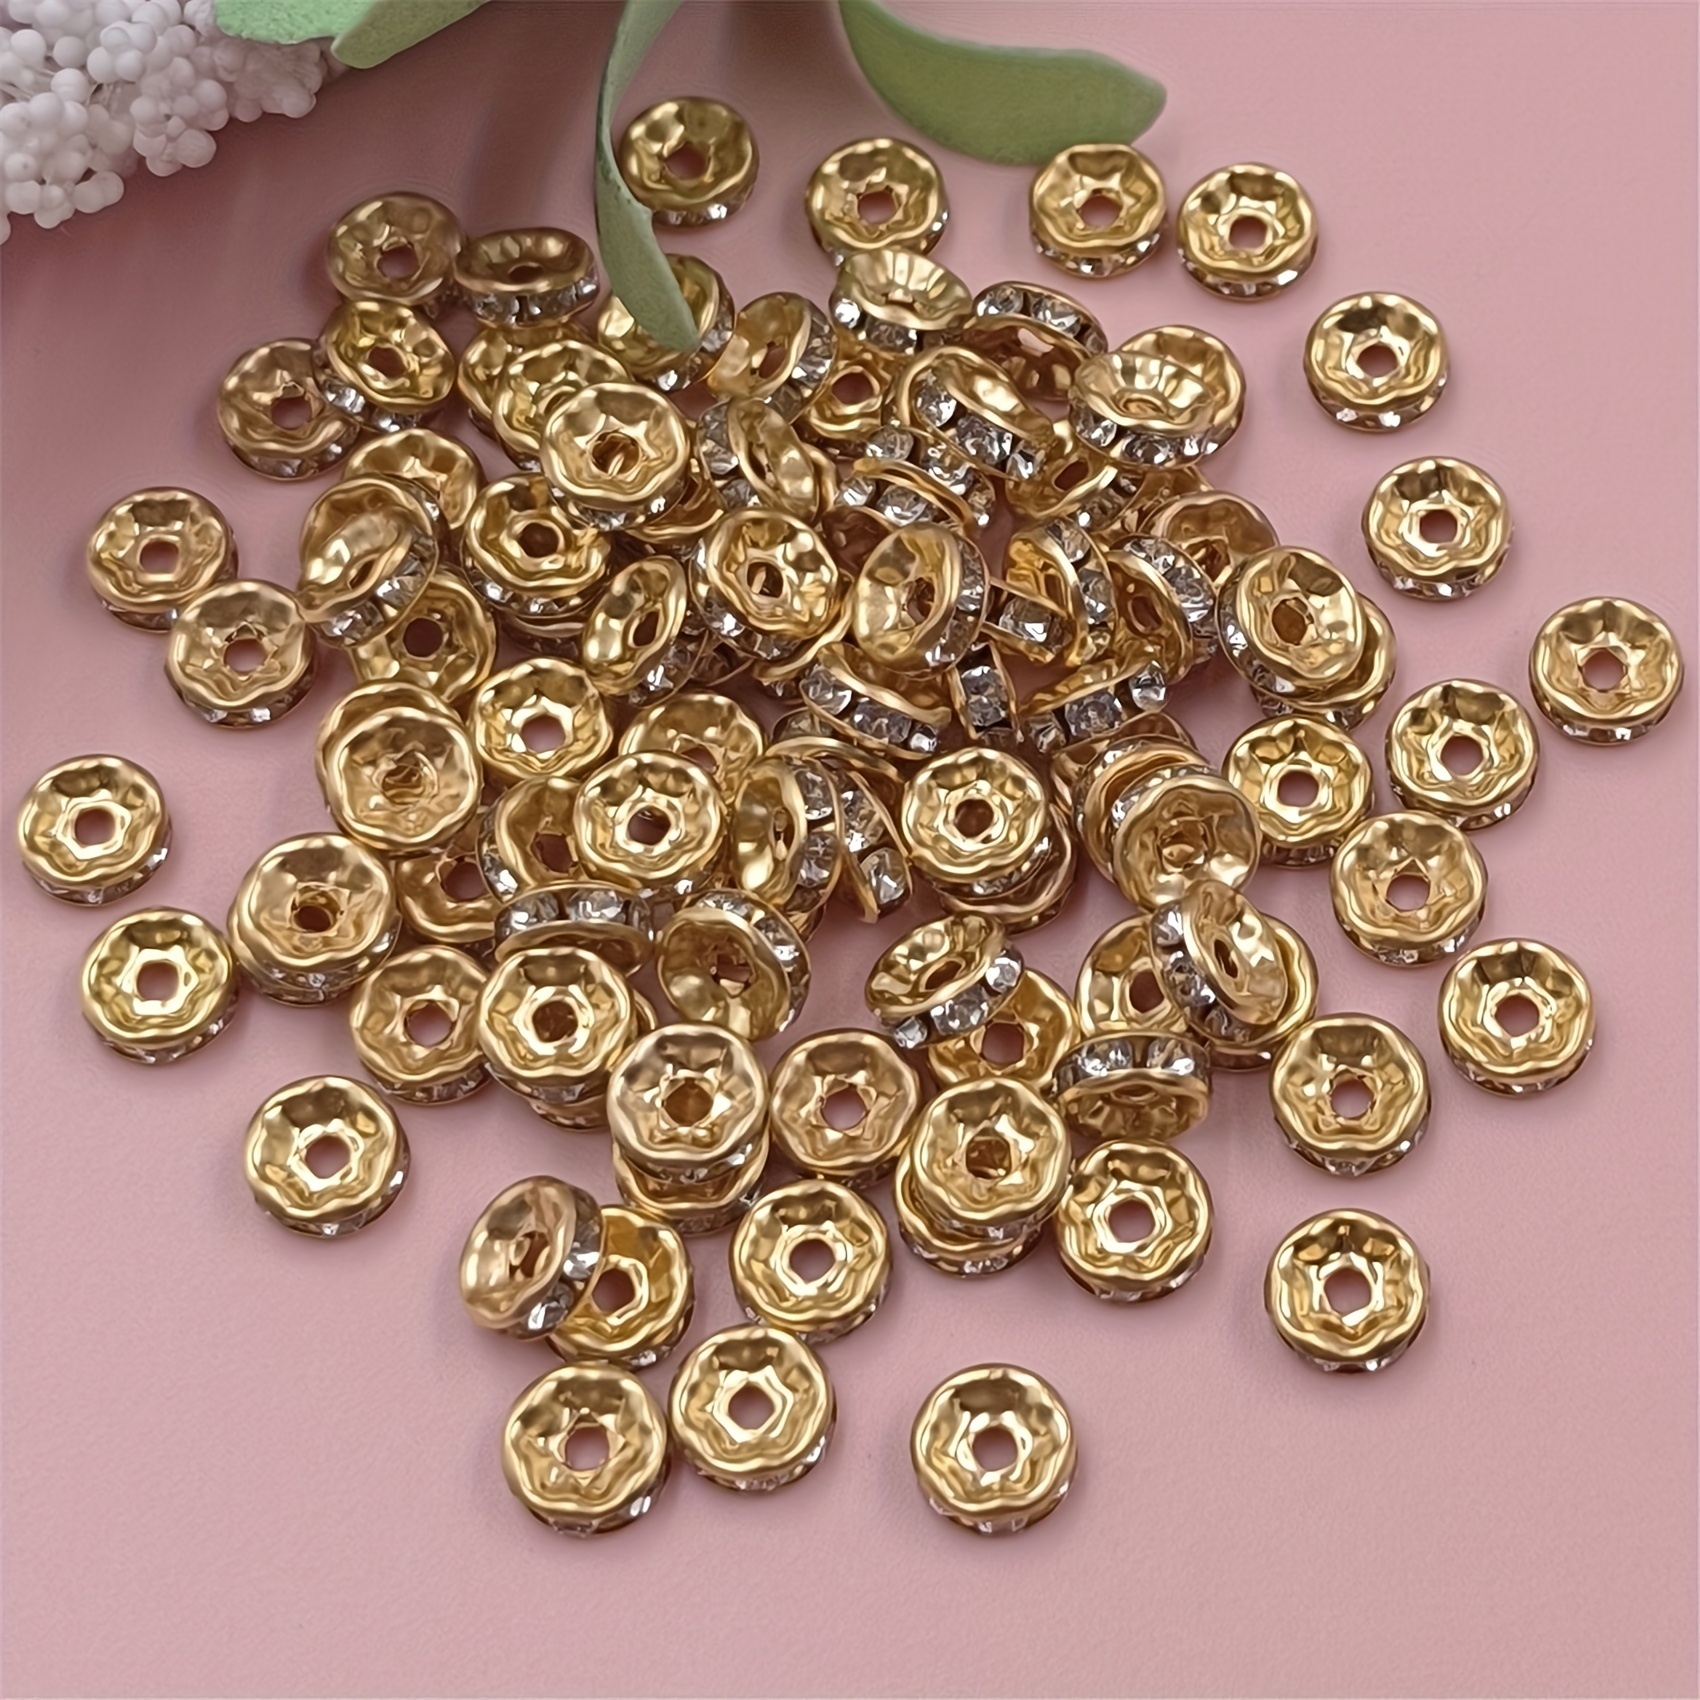  600Pcs Bracelet Making Kit Beads Rondelle Spacer Beads for  Jewelry Making, 8mm Rhinestone Spacer Beads Crystal Bead Spacers for  Bracelets, Focal Beads for Pen, 10 Colors : Arts, Crafts & Sewing